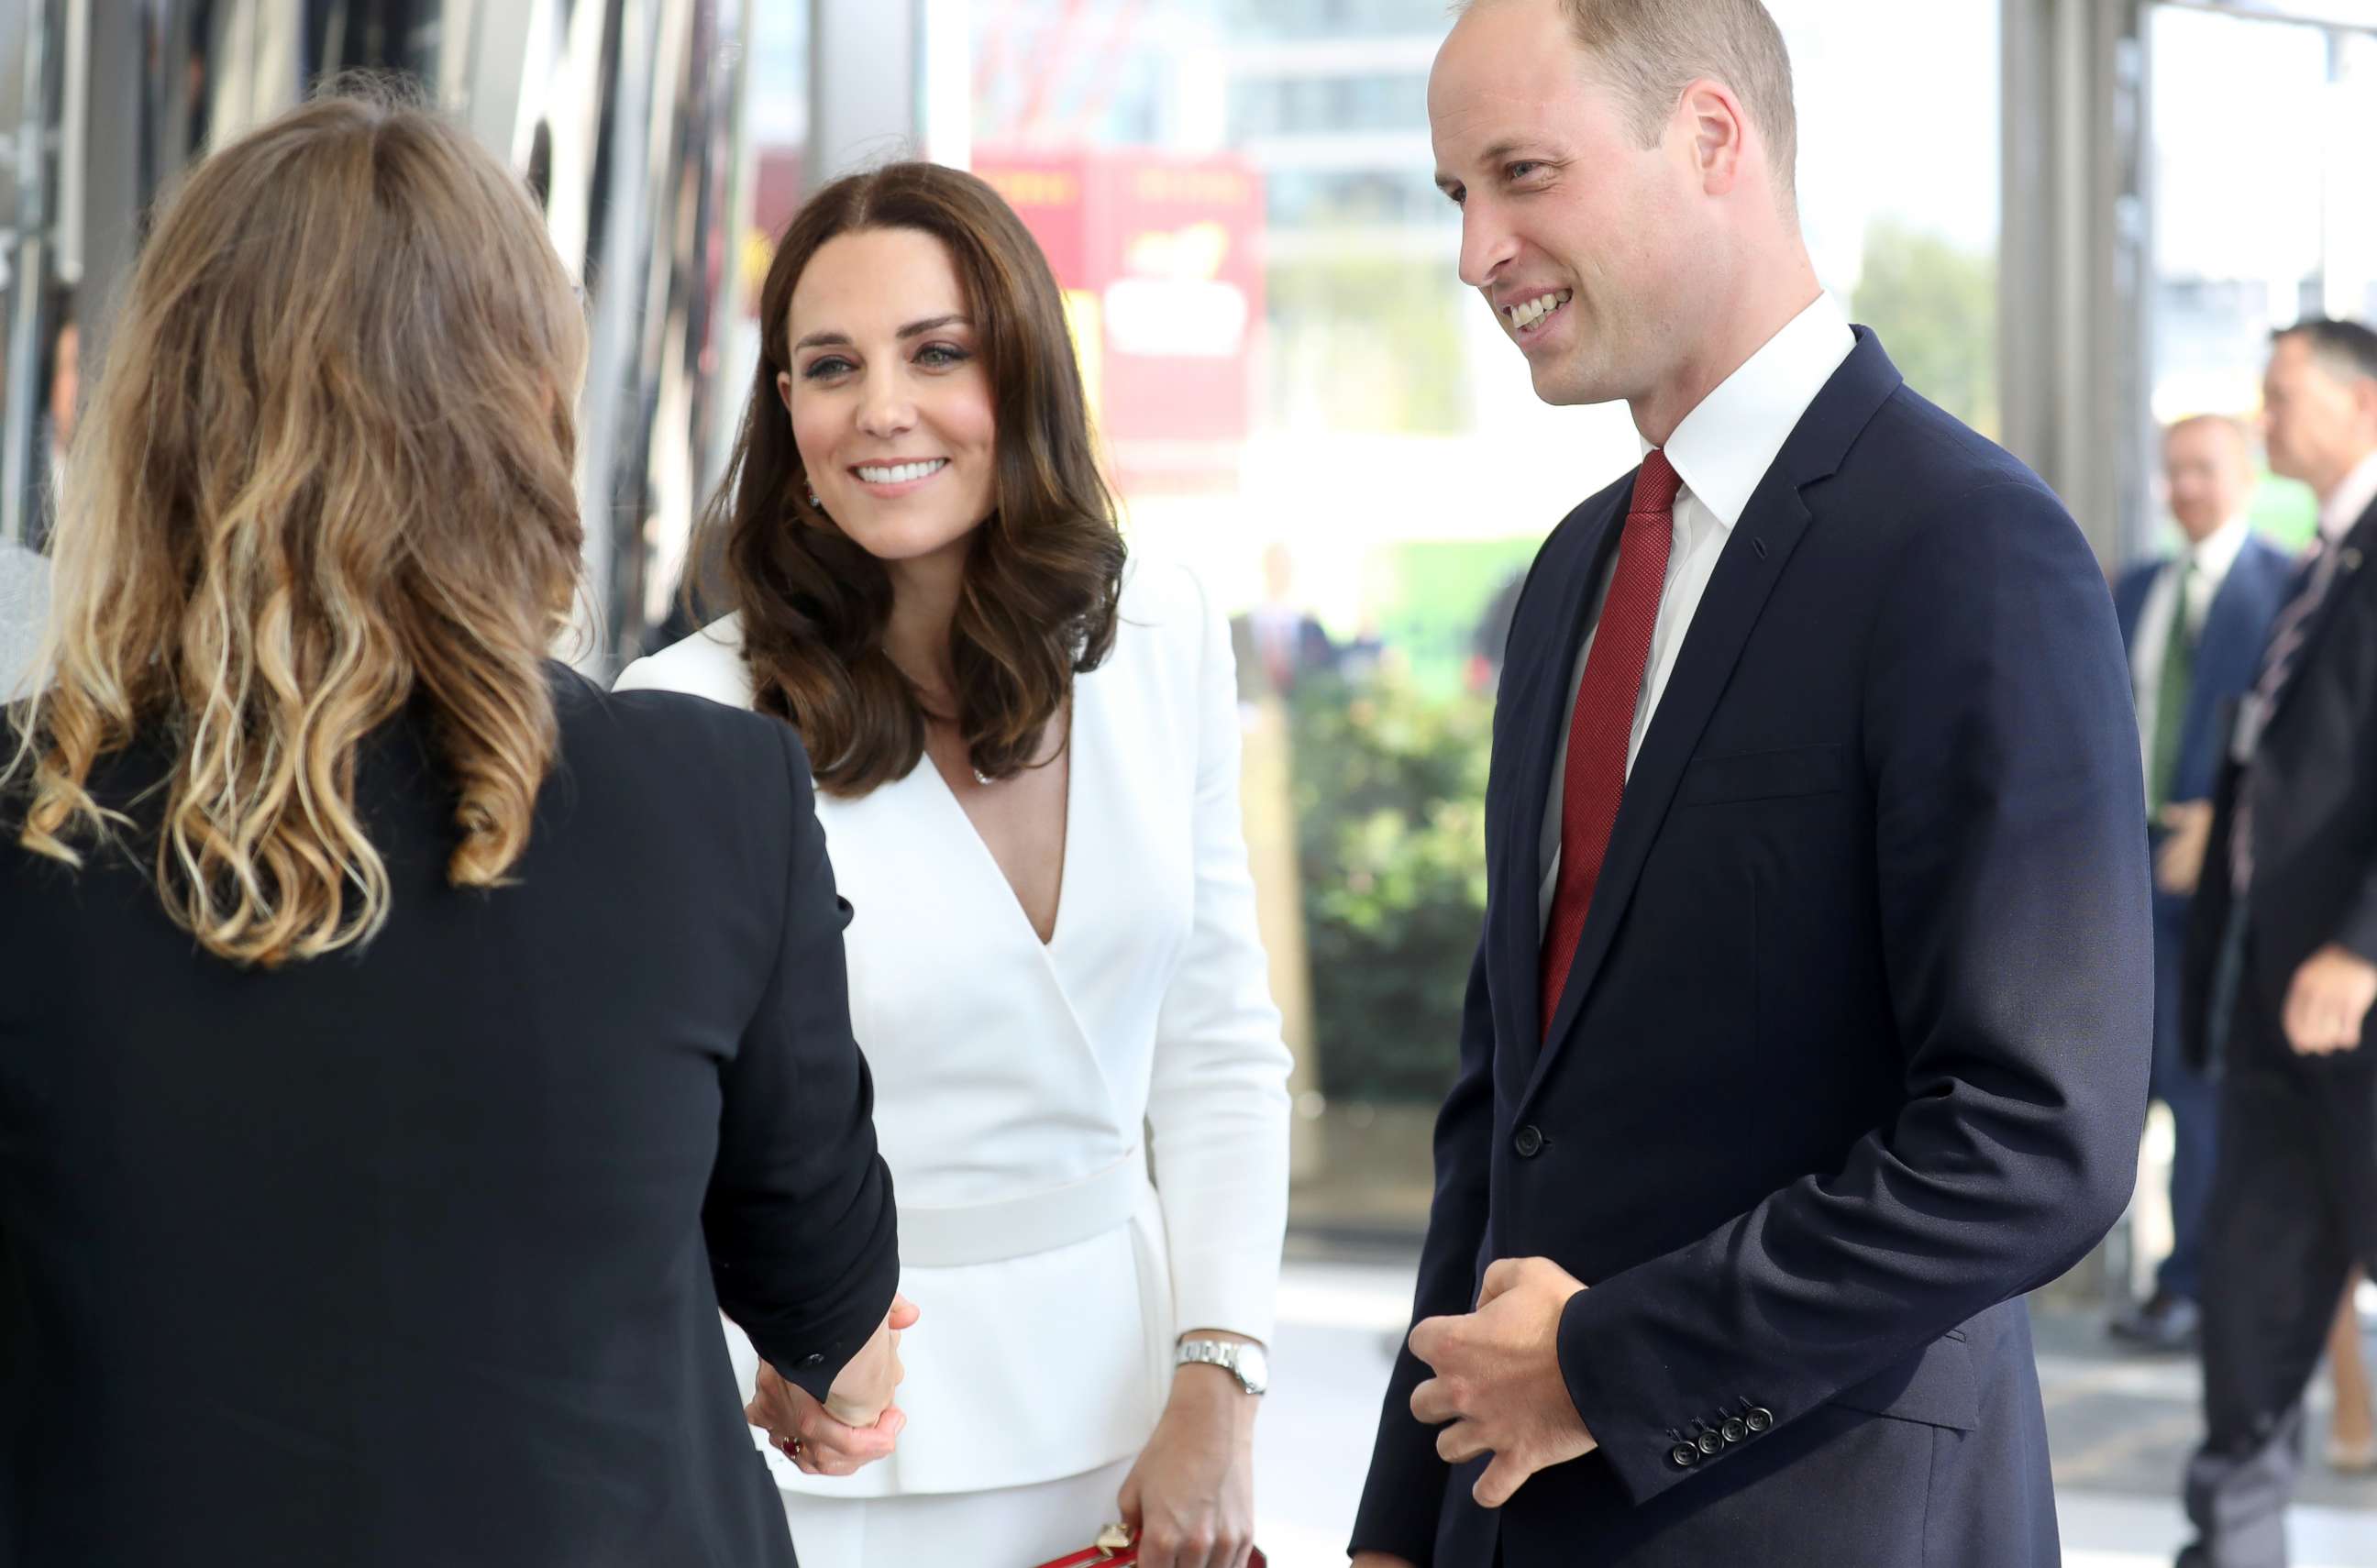 PHOTO: Catherine, Duchess of Cambridge and Prince William arrive to meet young entrepreneurs during a reception at the Heart, Spire Building on day 1 of their official visit to Poland on July 17, 2017 in Warsaw, Poland.